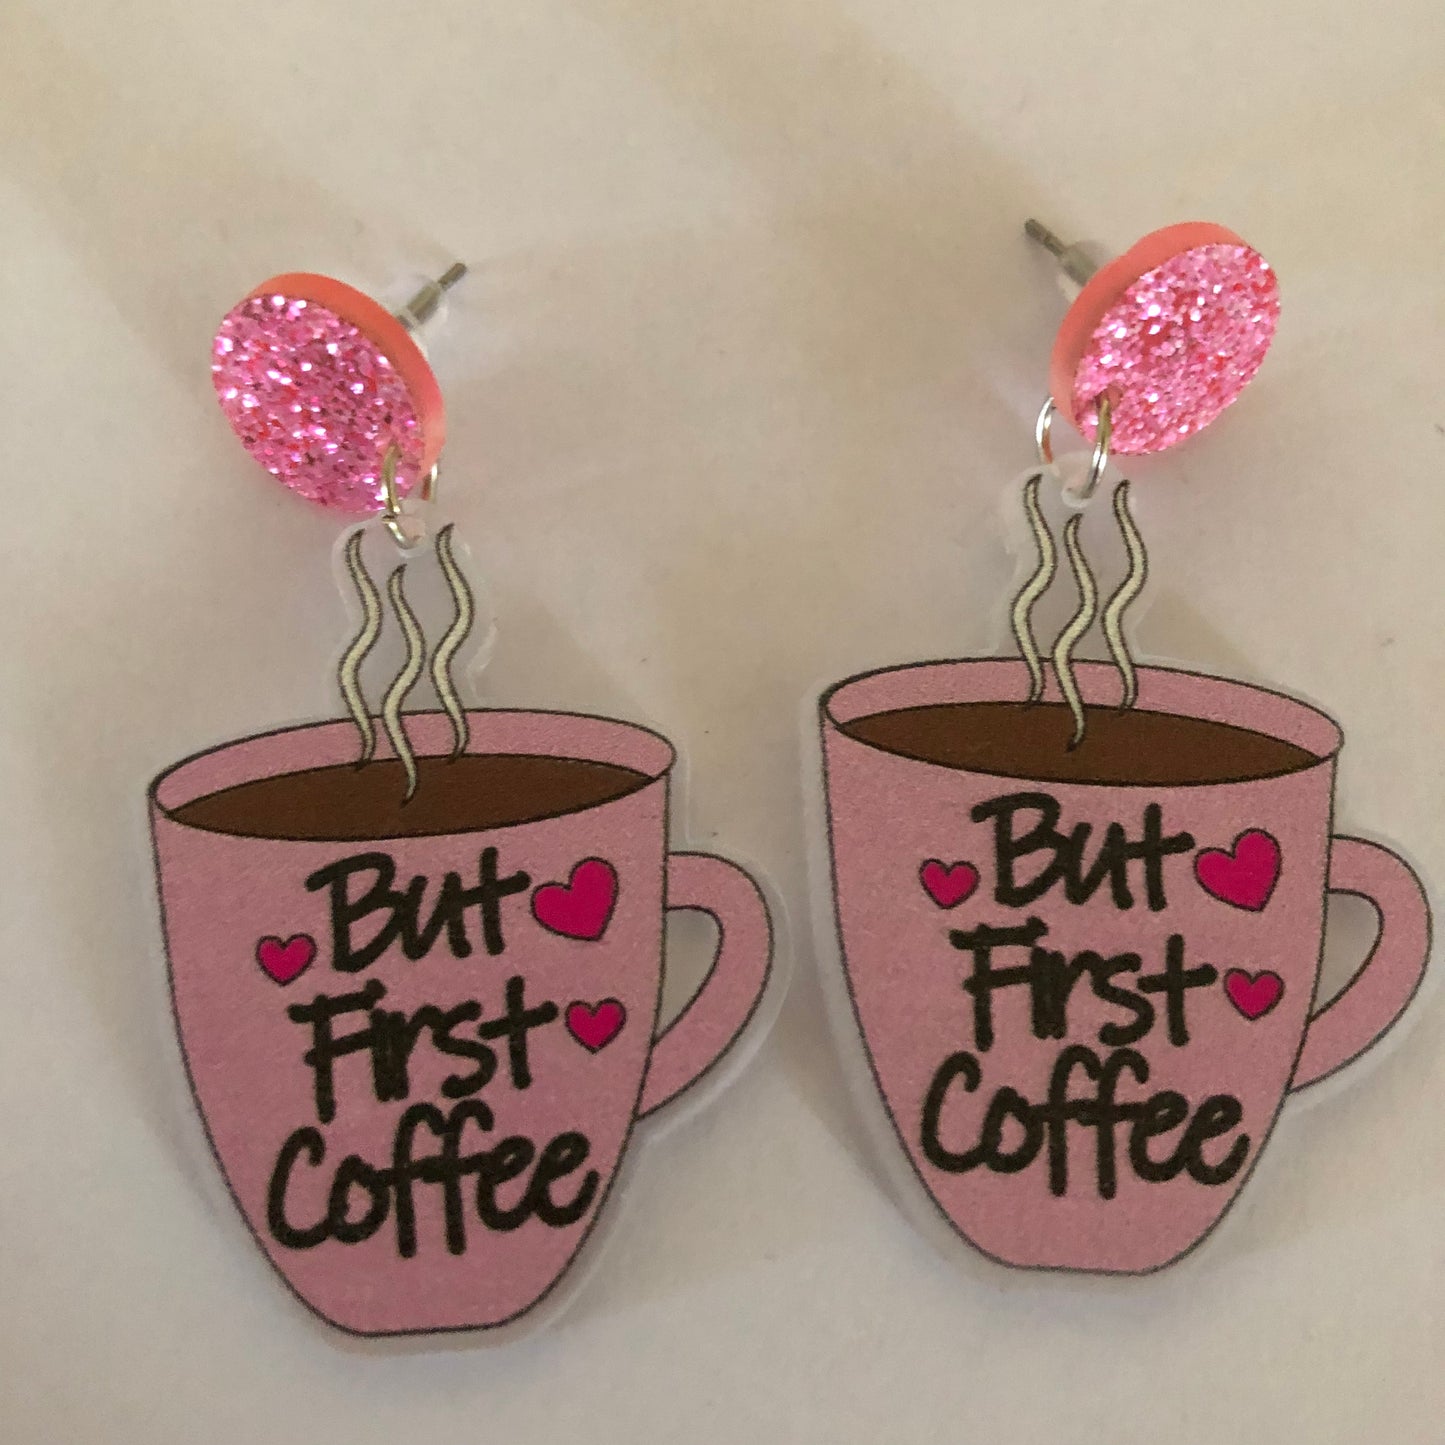 But first coffee earrings